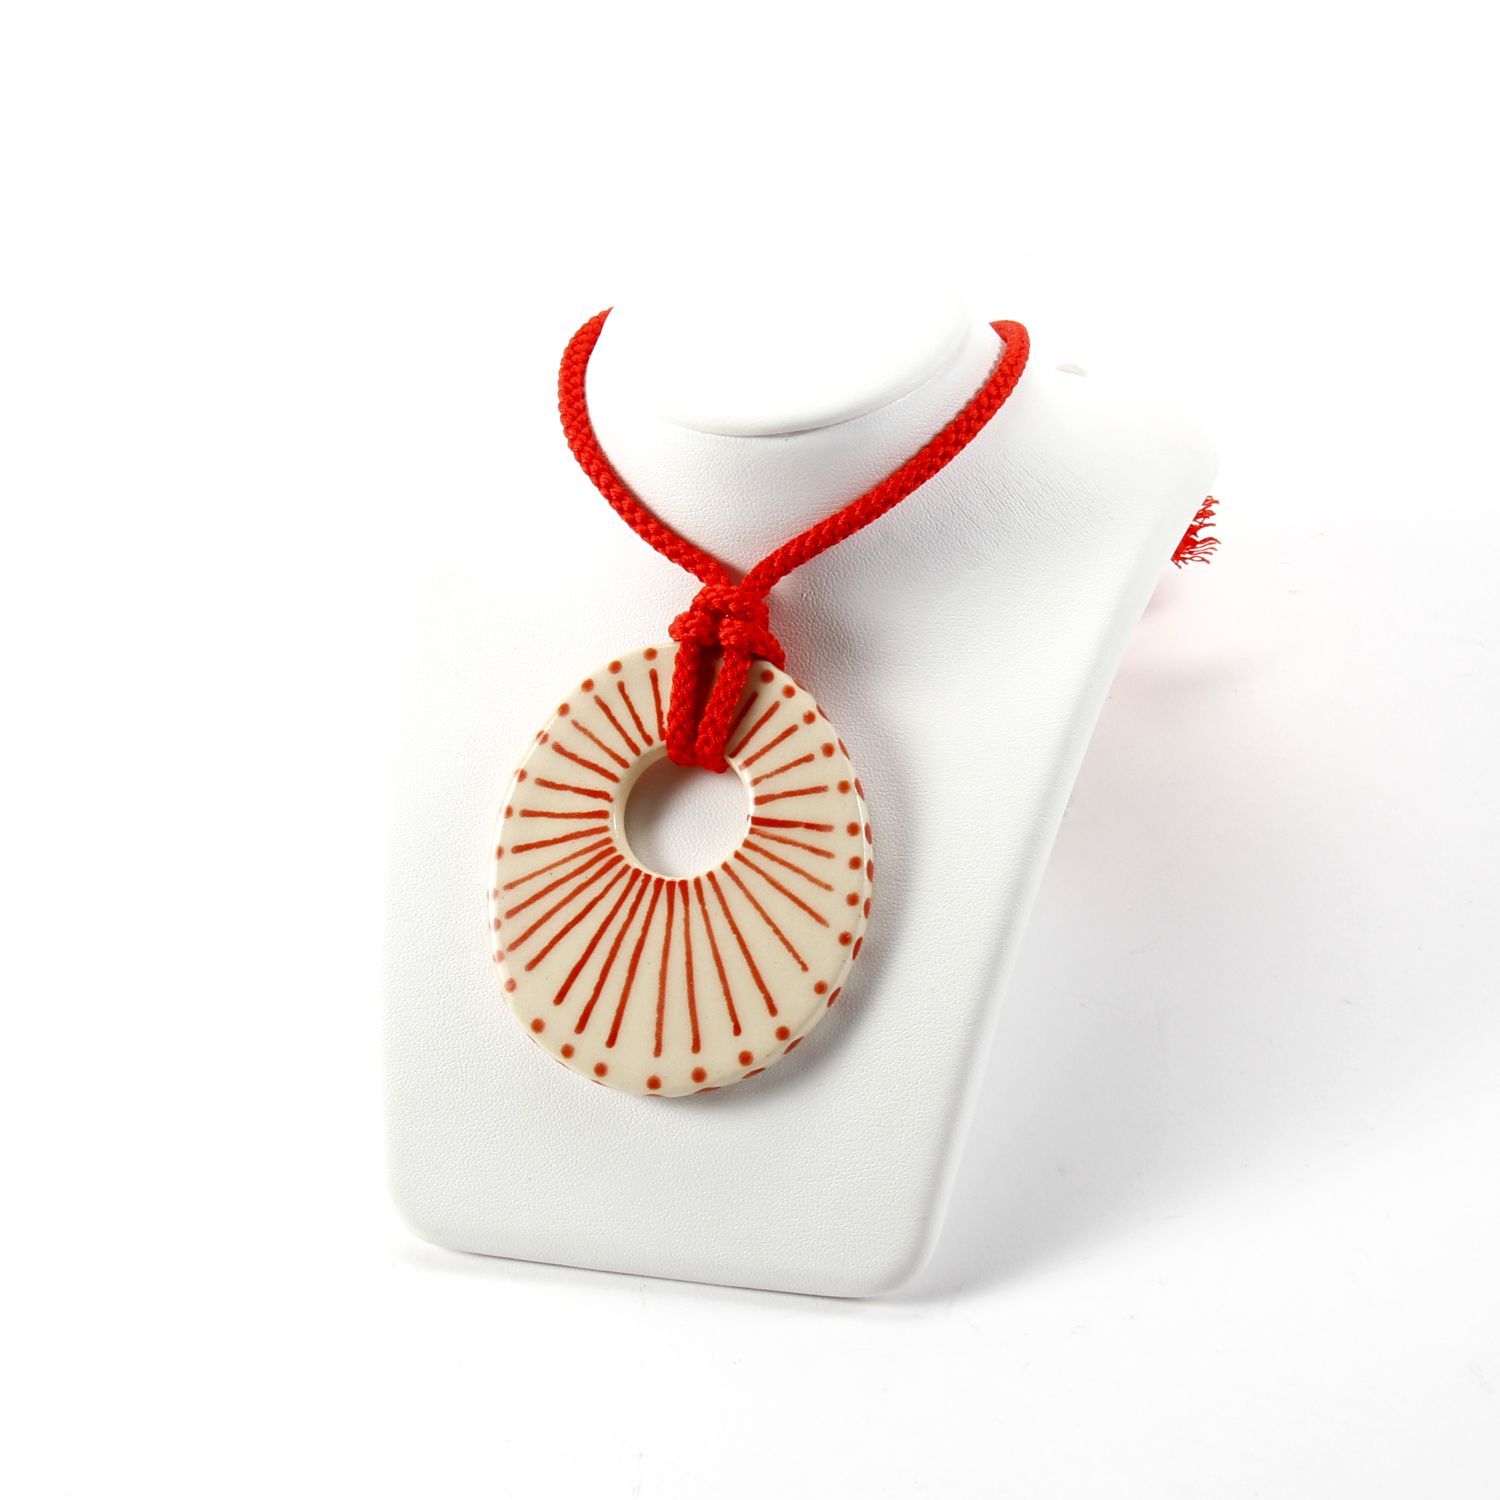 Here and Here: Pendant with Lines and Dots Product Image 1 of 2